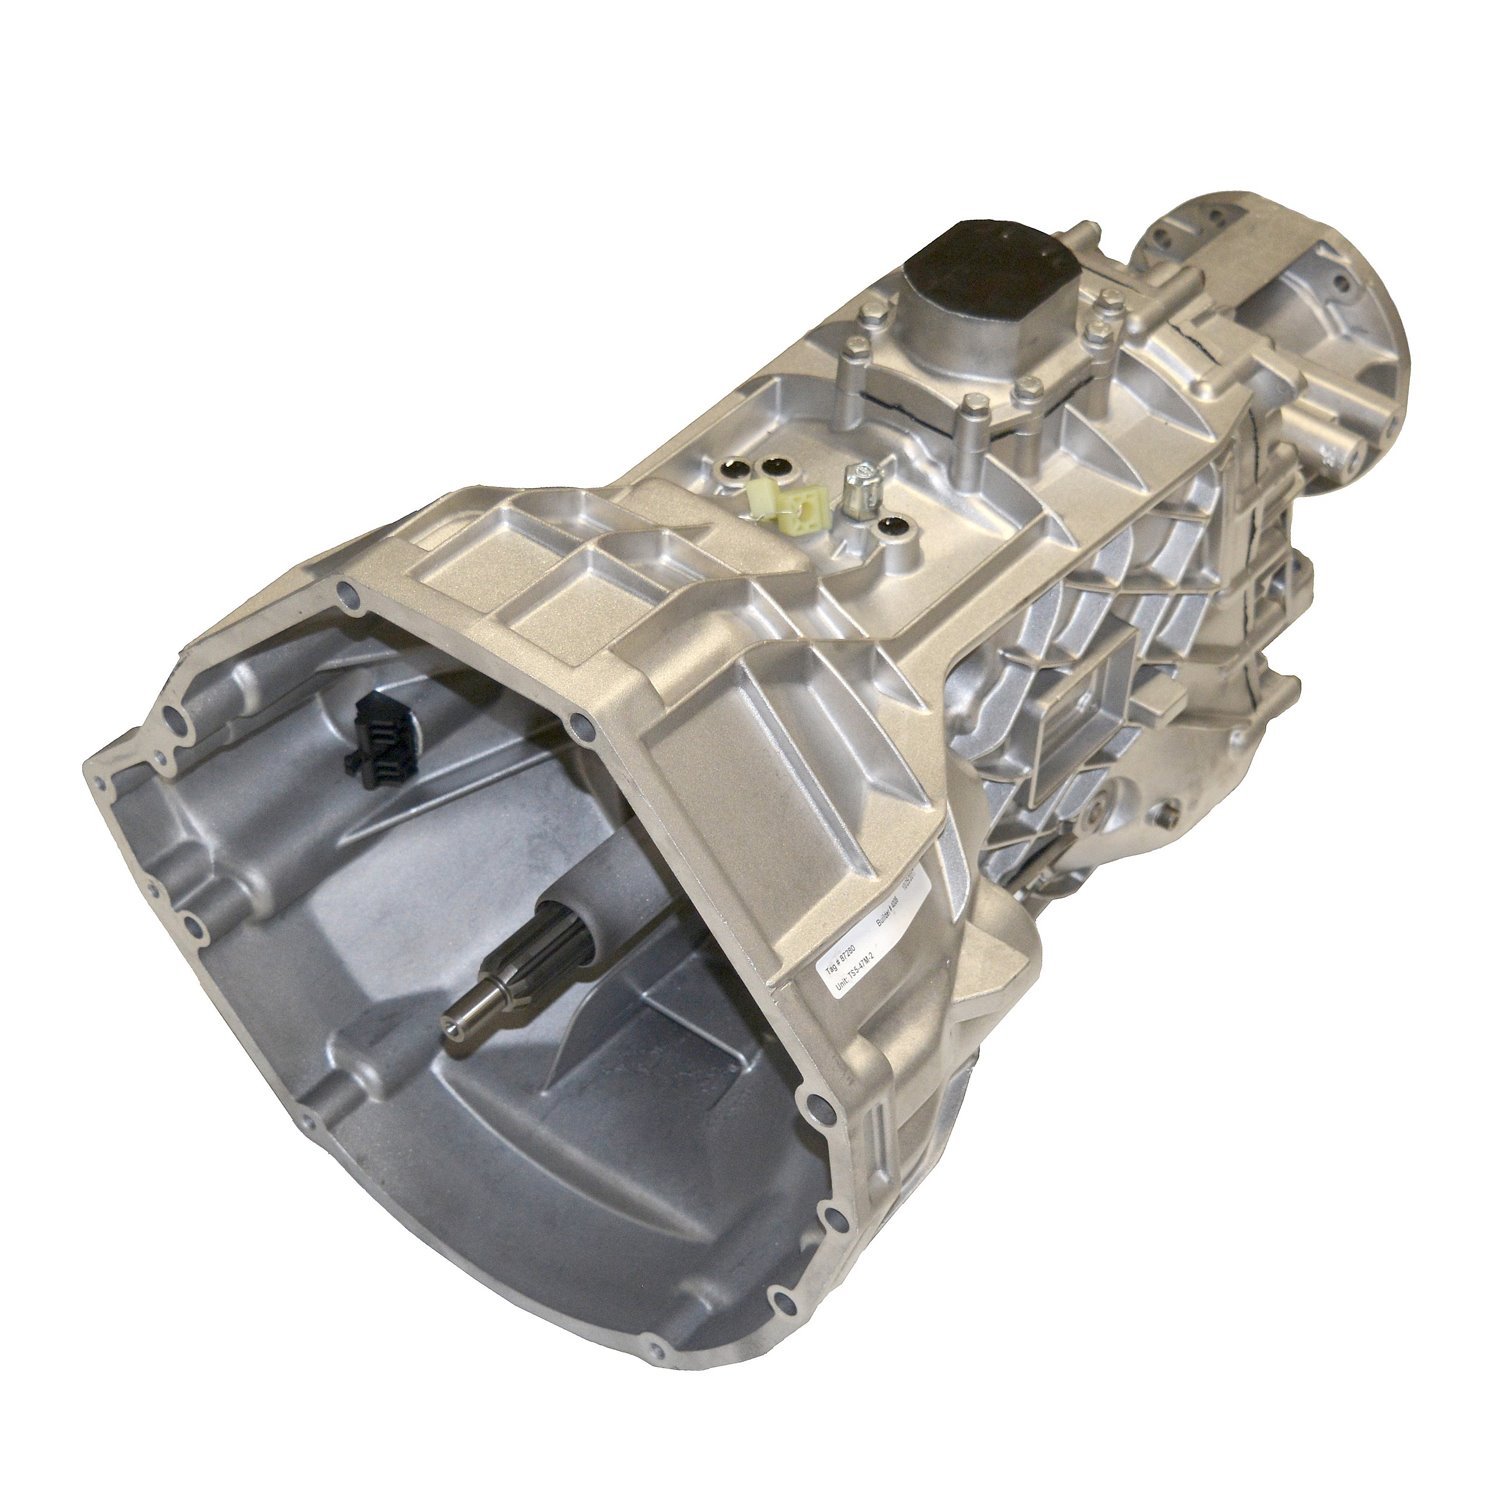 Remanufactured S5-47 Manual Transmission for Ford 99-01 F-series